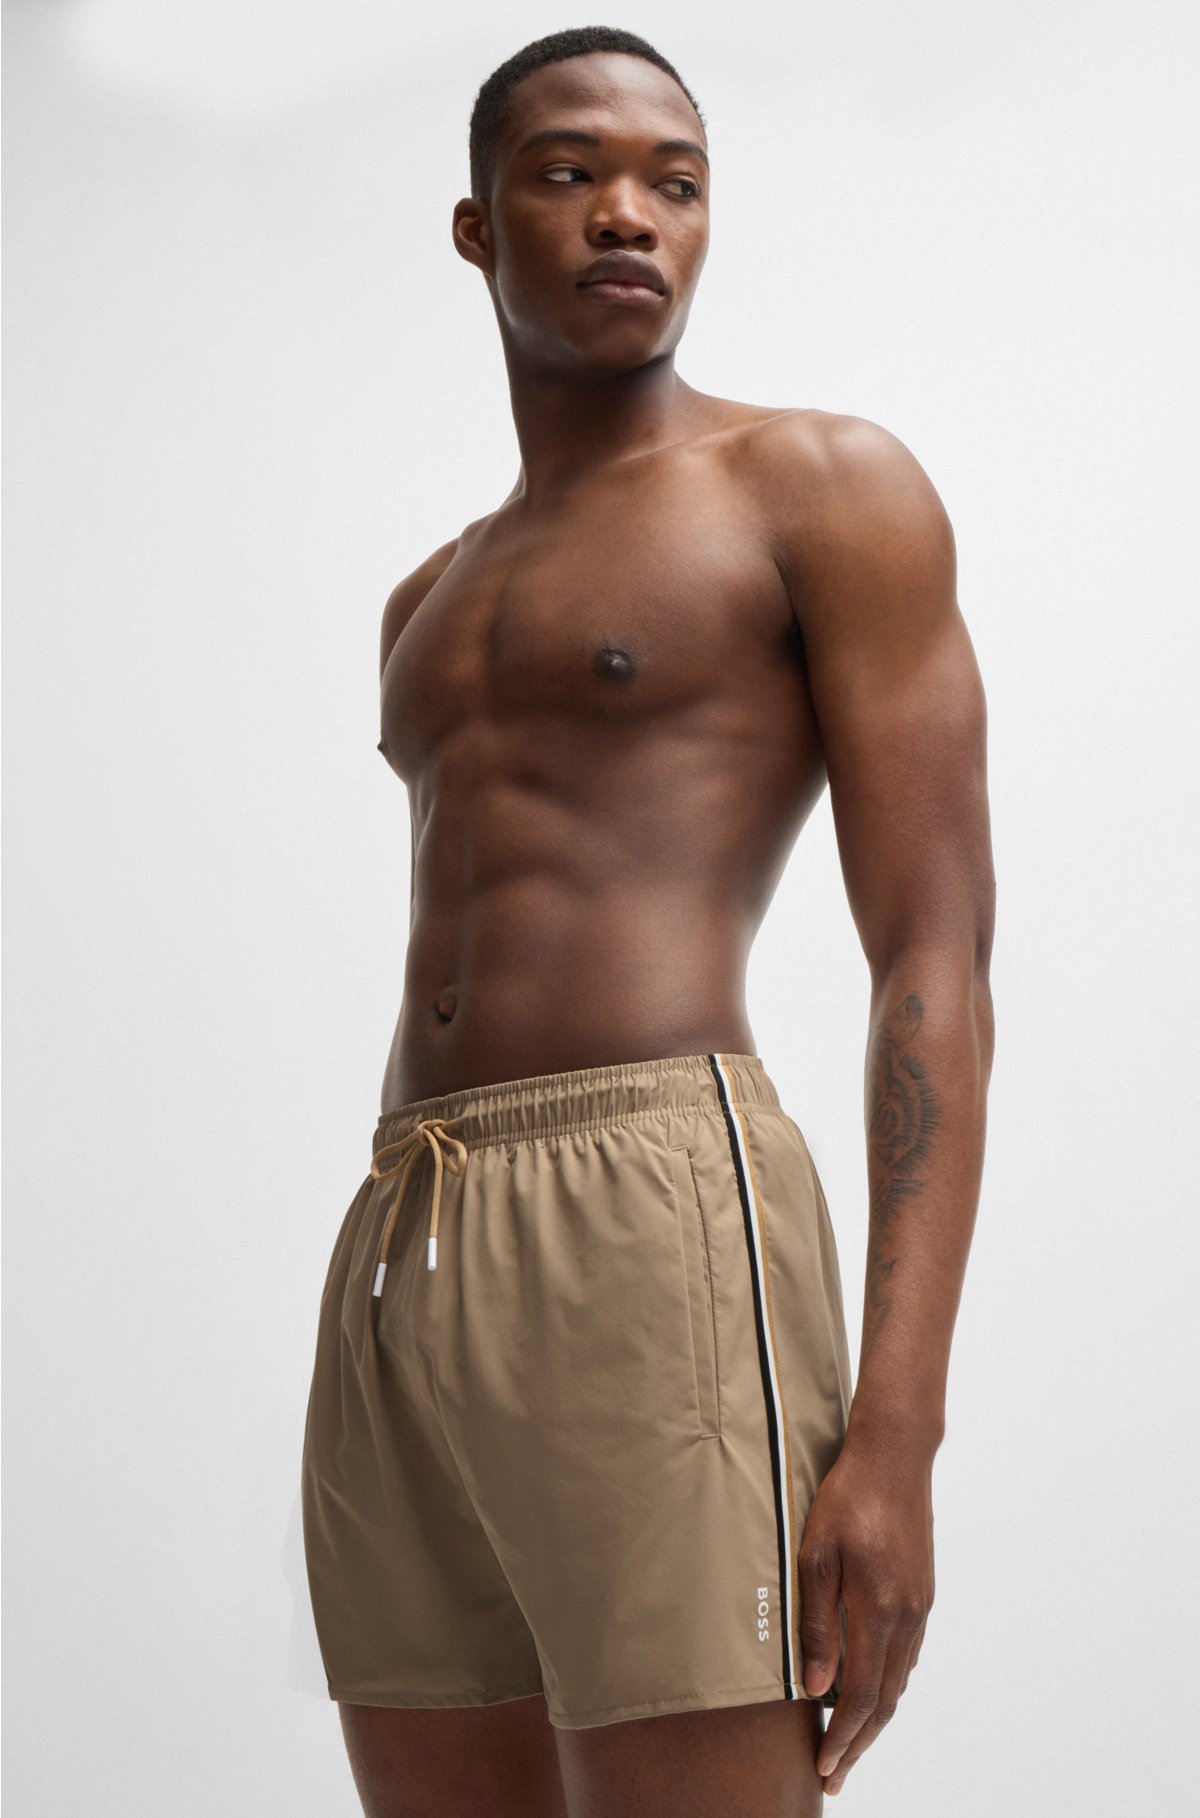 Fully lined swim shorts with signature stripe, Beige